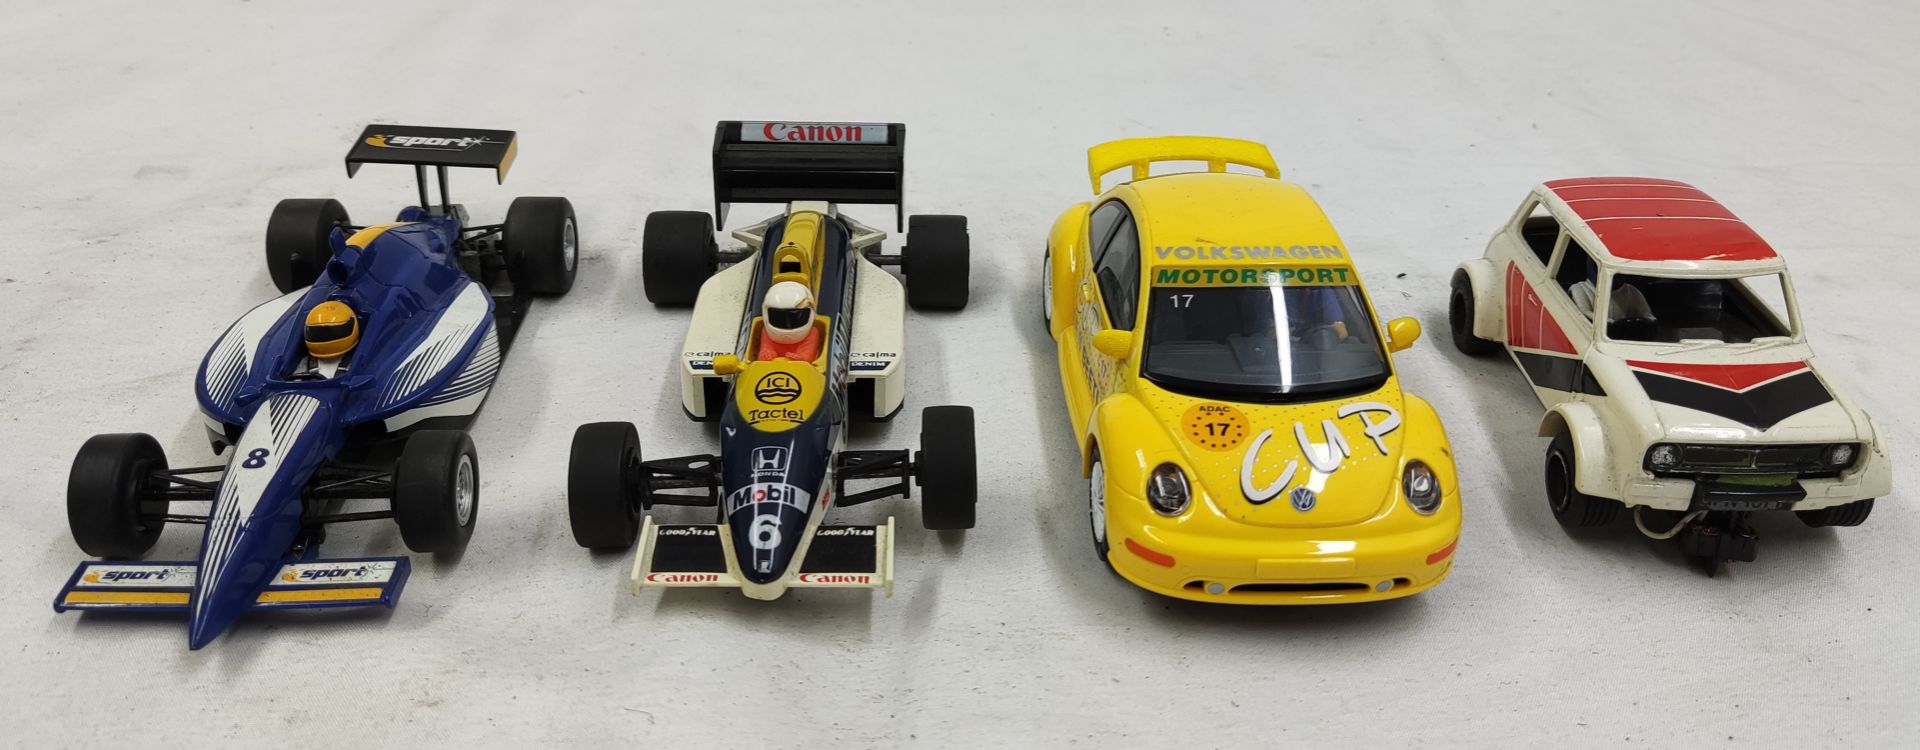 4 x Scalextric Cars Including VW Beetle, F1 Car, Open Wheeler and Mini Clubman 1275GT - Tested and - Image 2 of 11